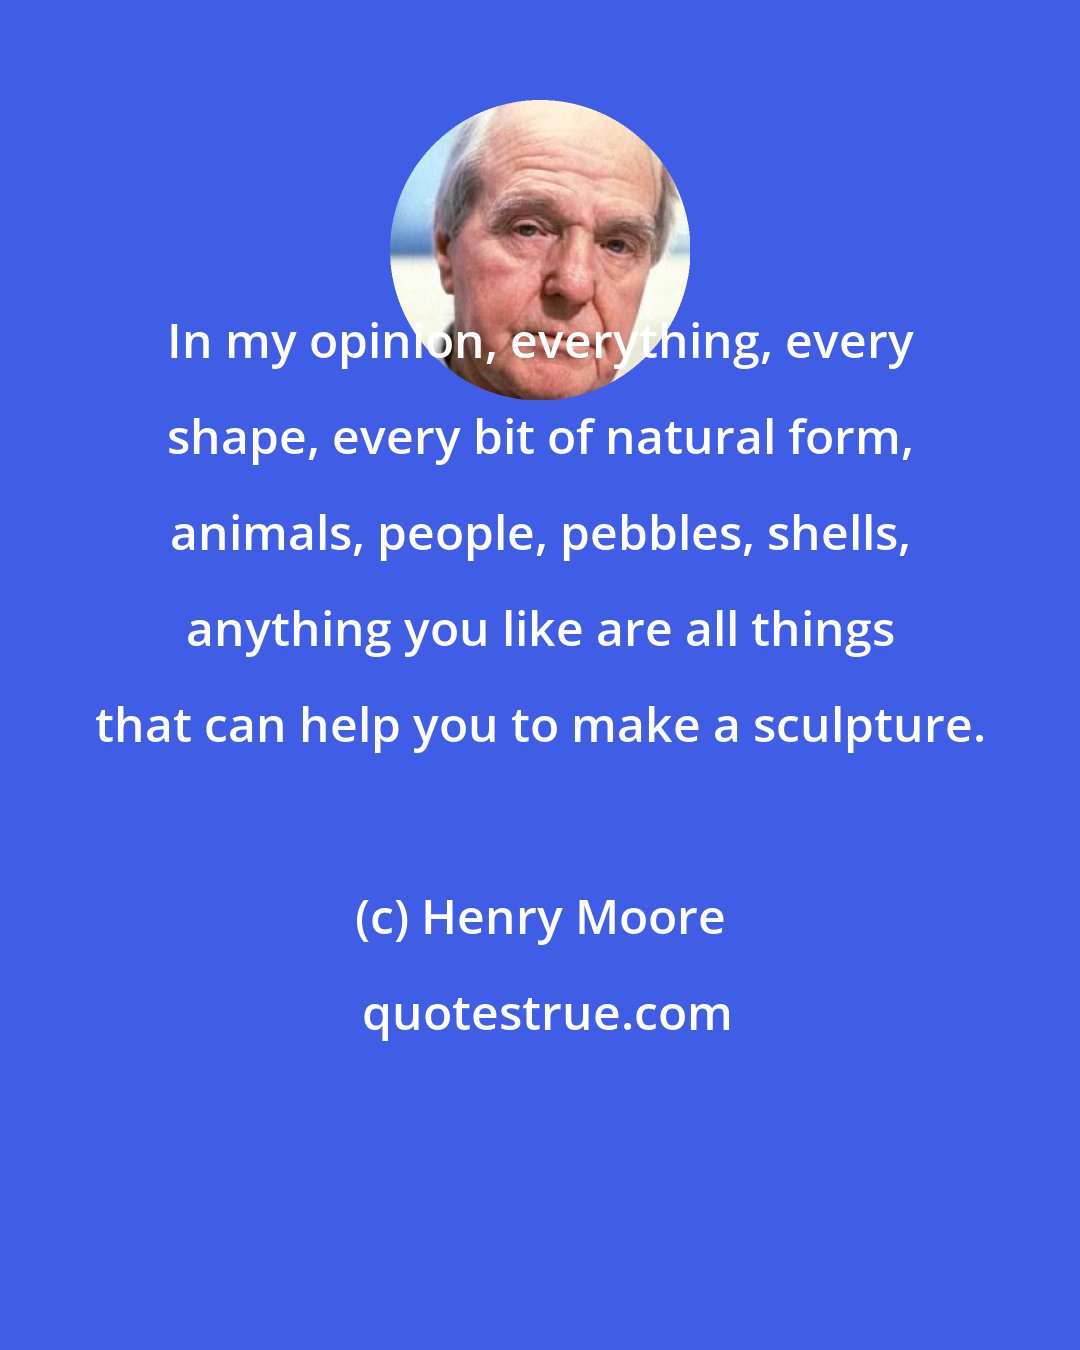 Henry Moore: In my opinion, everything, every shape, every bit of natural form, animals, people, pebbles, shells, anything you like are all things that can help you to make a sculpture.